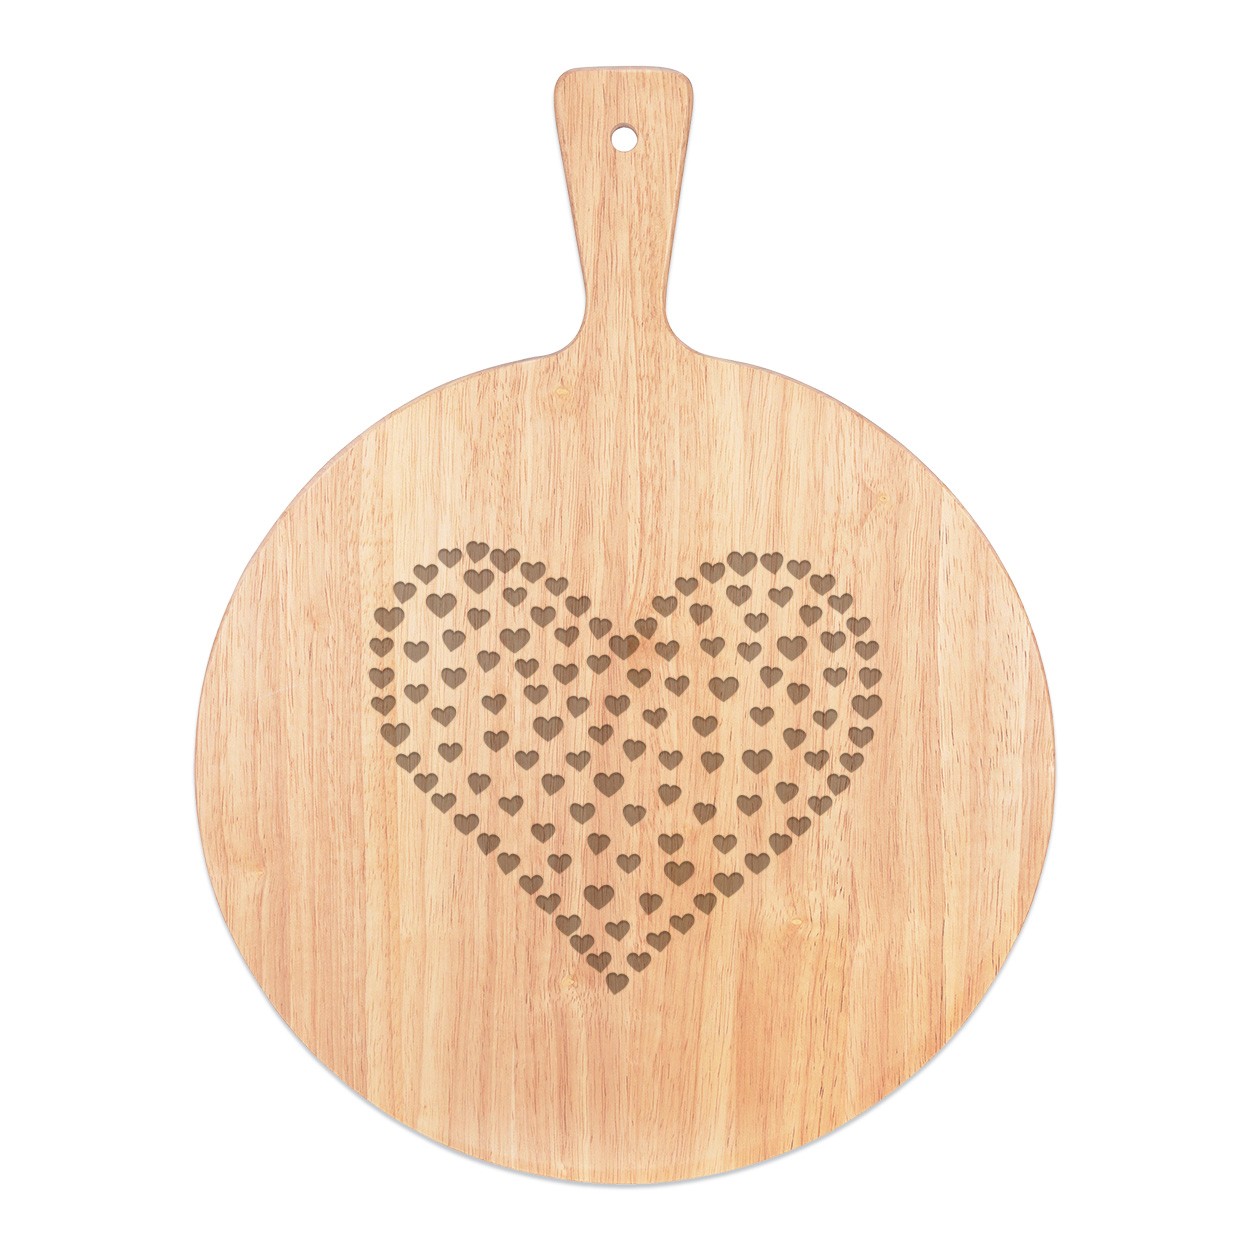 Heart Of Hearts Pizza Board Paddle Serving Tray Handle Round Wooden 45x34cm